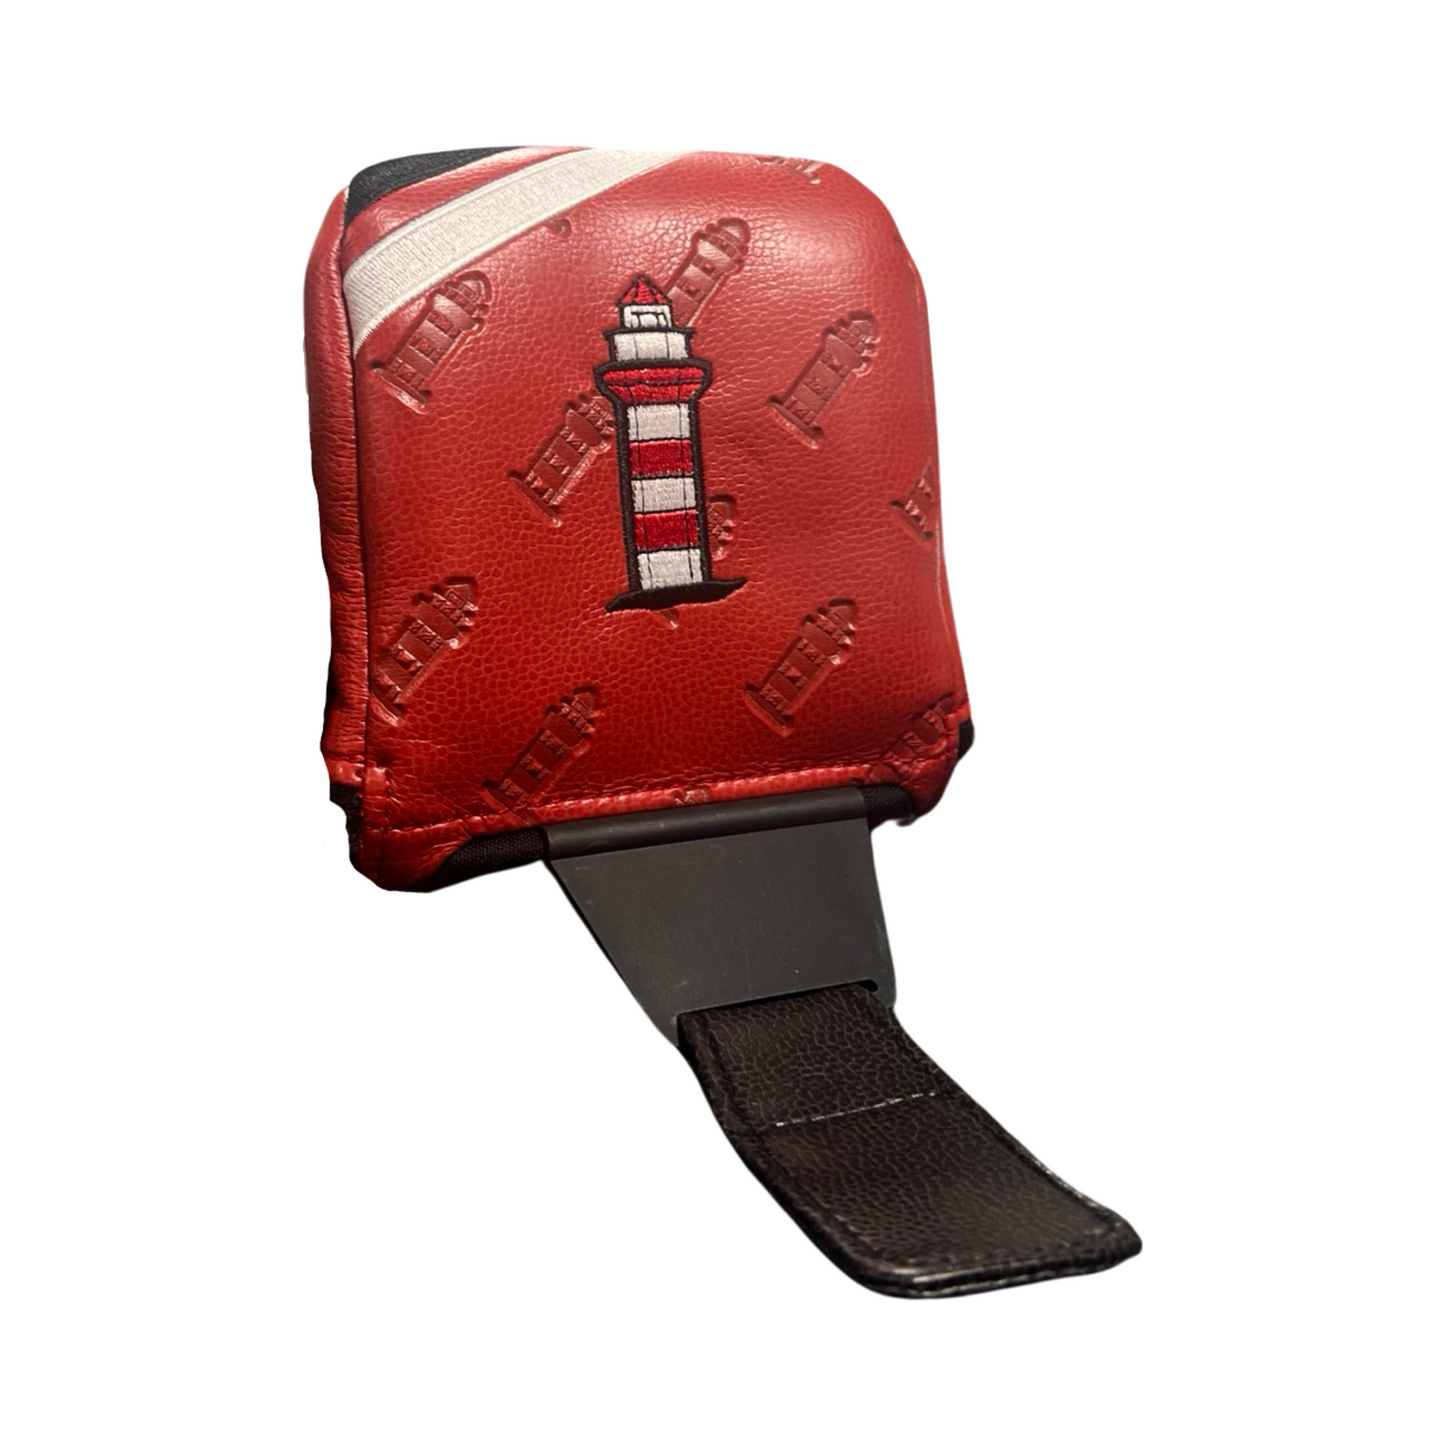 AM&E Leather Mallet Putter Cover - Red